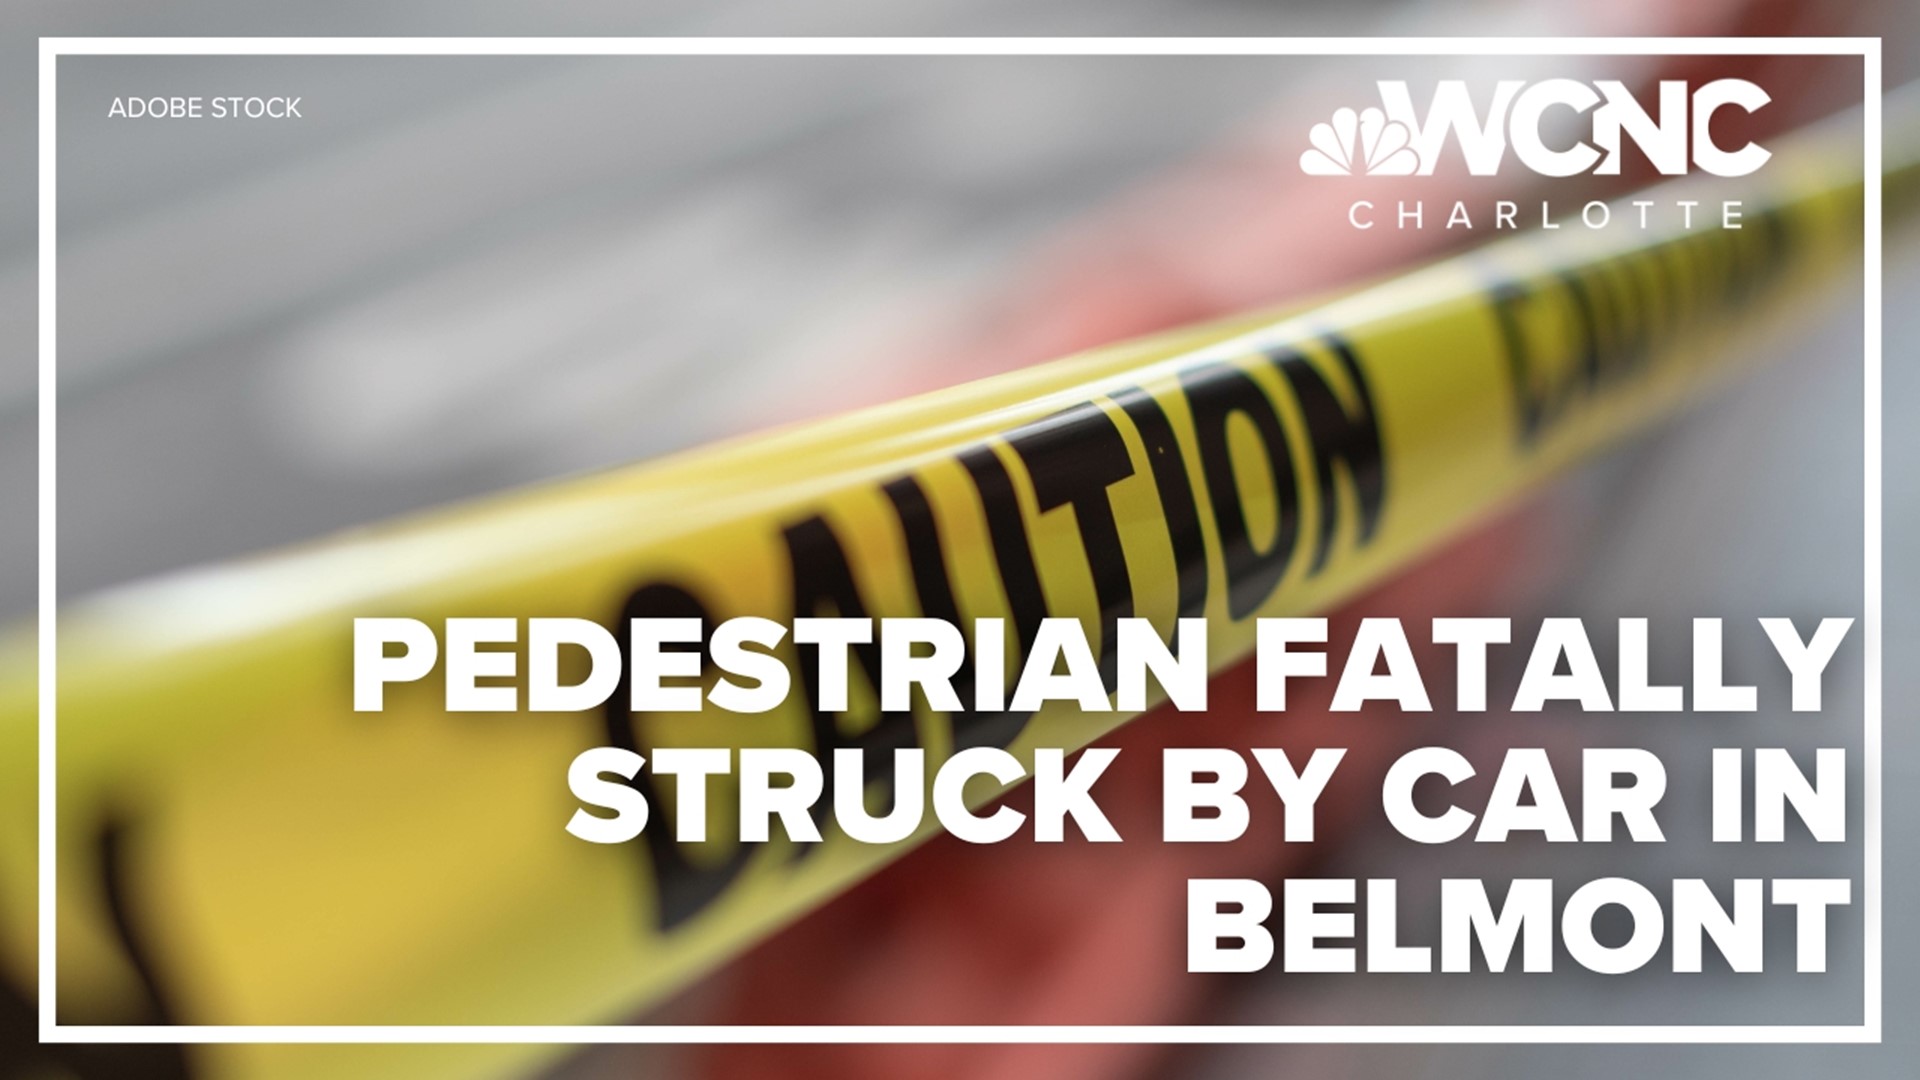 The pedestrian was taken to the hospital where they later died due to the severity of their injuries, police said.